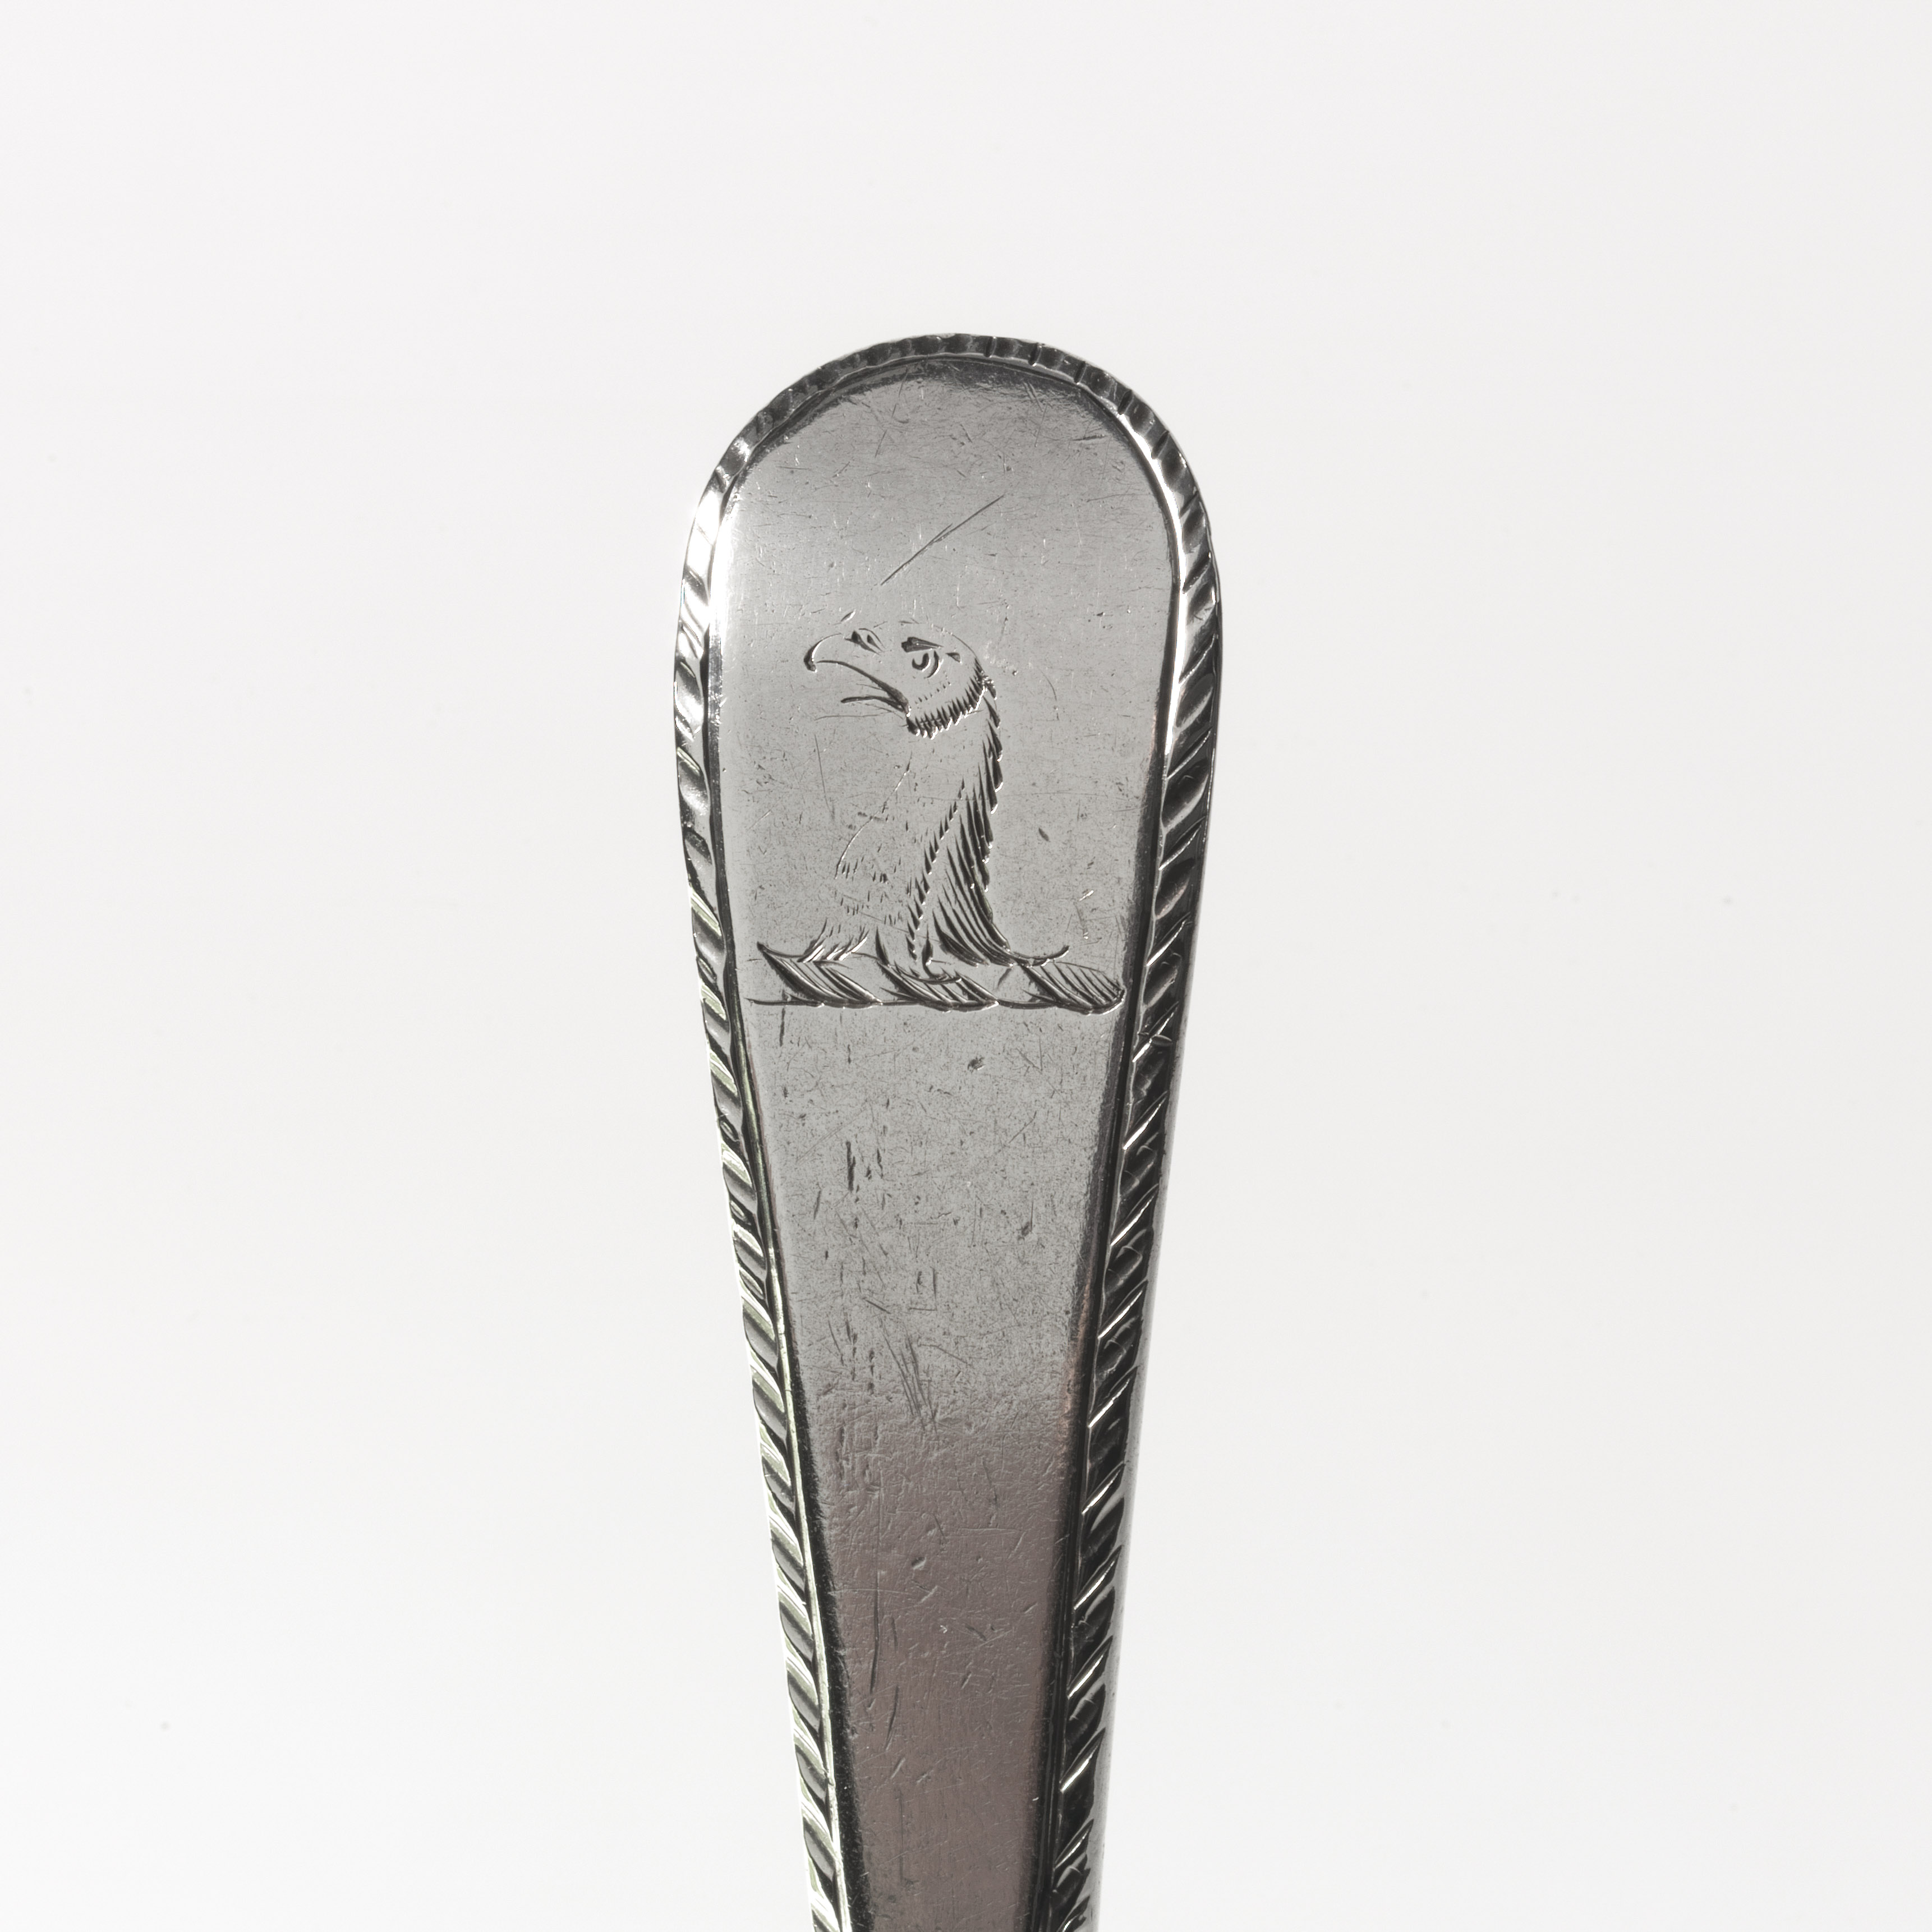 A snake engraved on a silver spoon handle